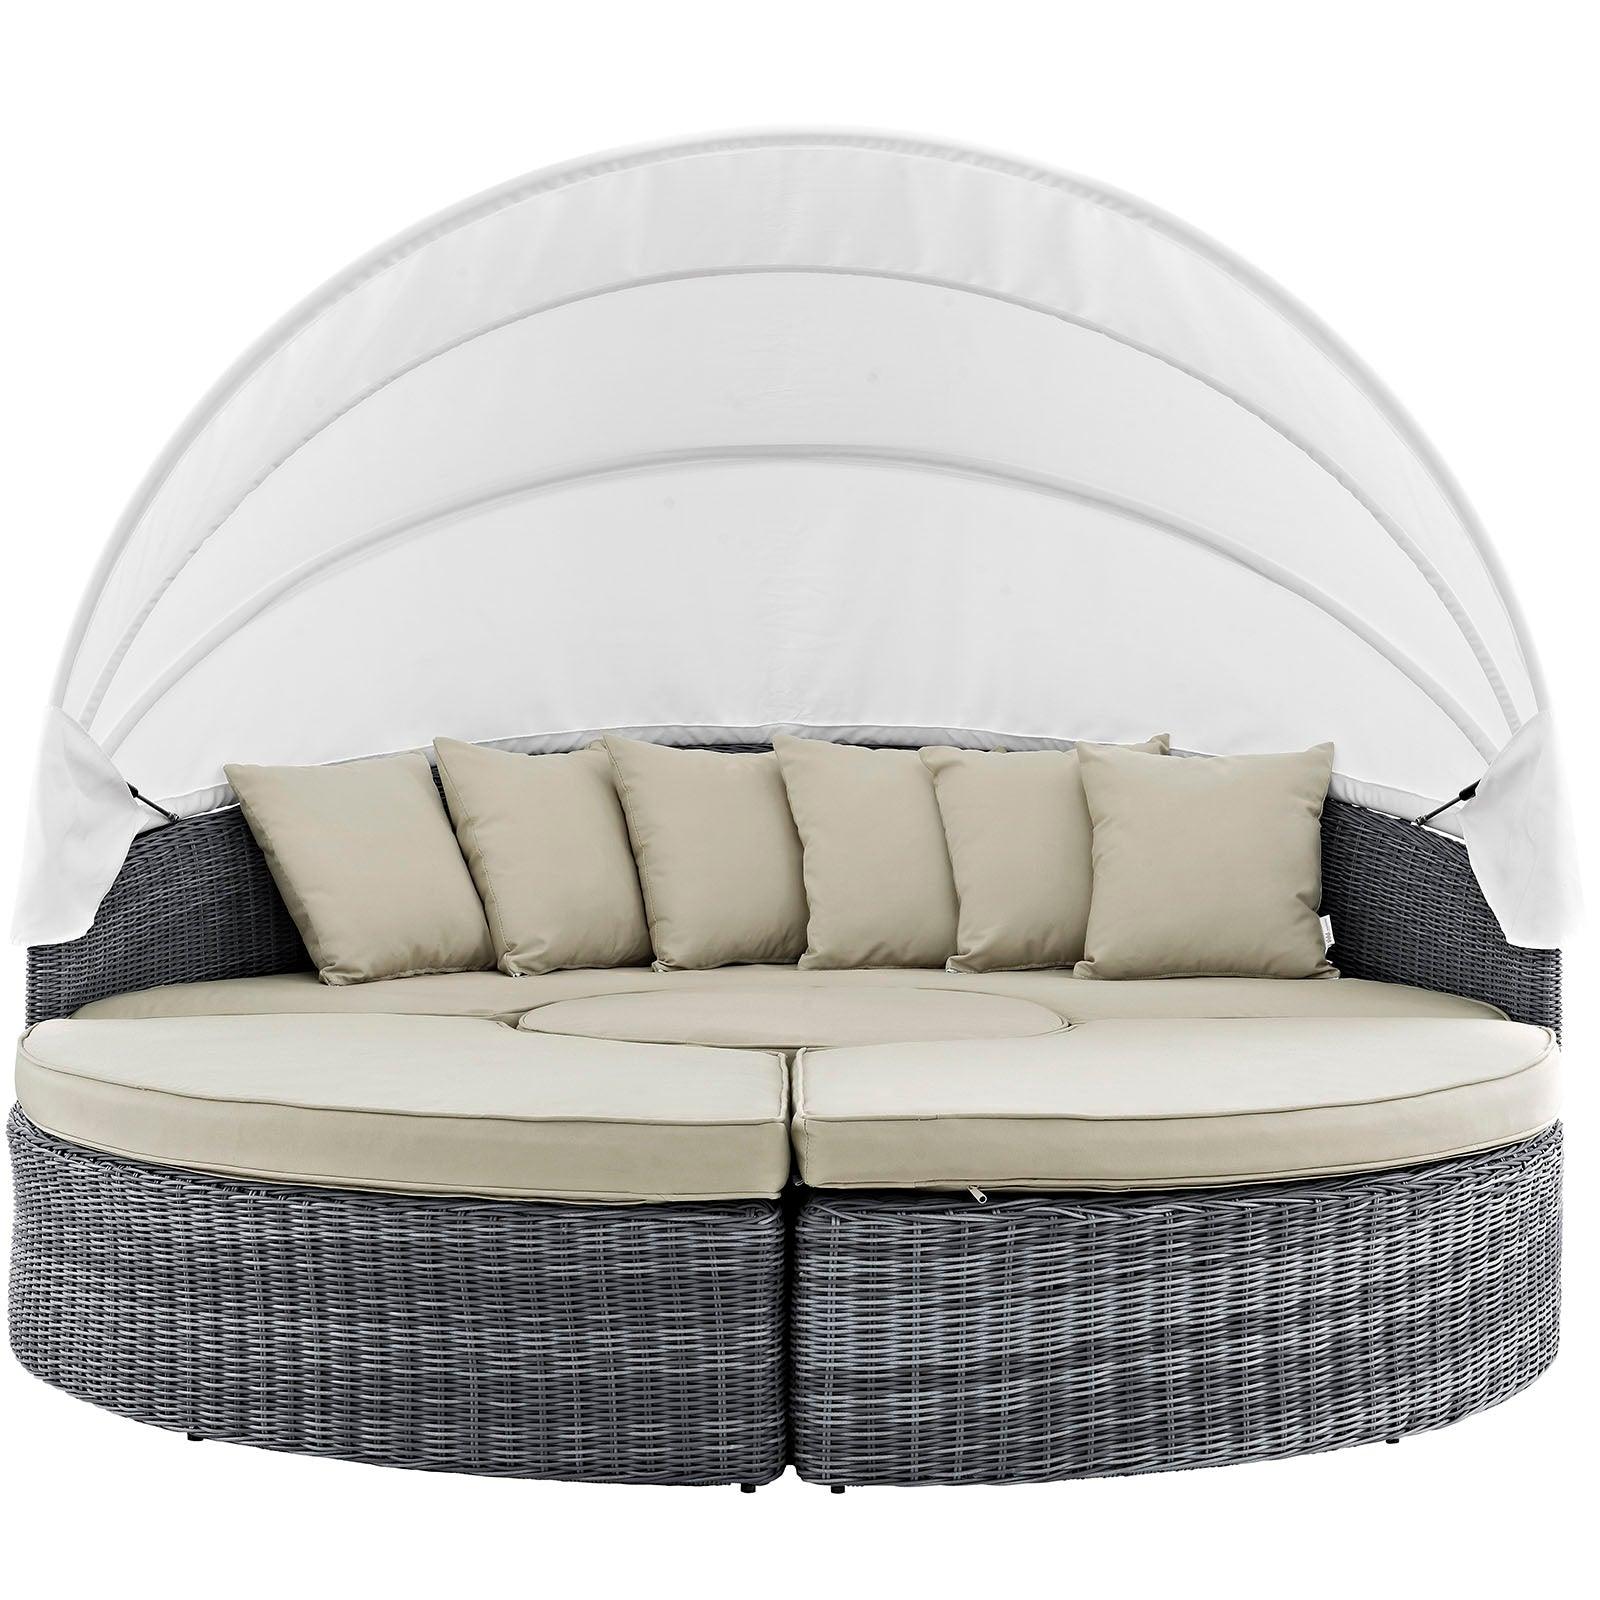 Modway Summon Canopy Outdoor Patio Sunbrella® Daybed FredCo